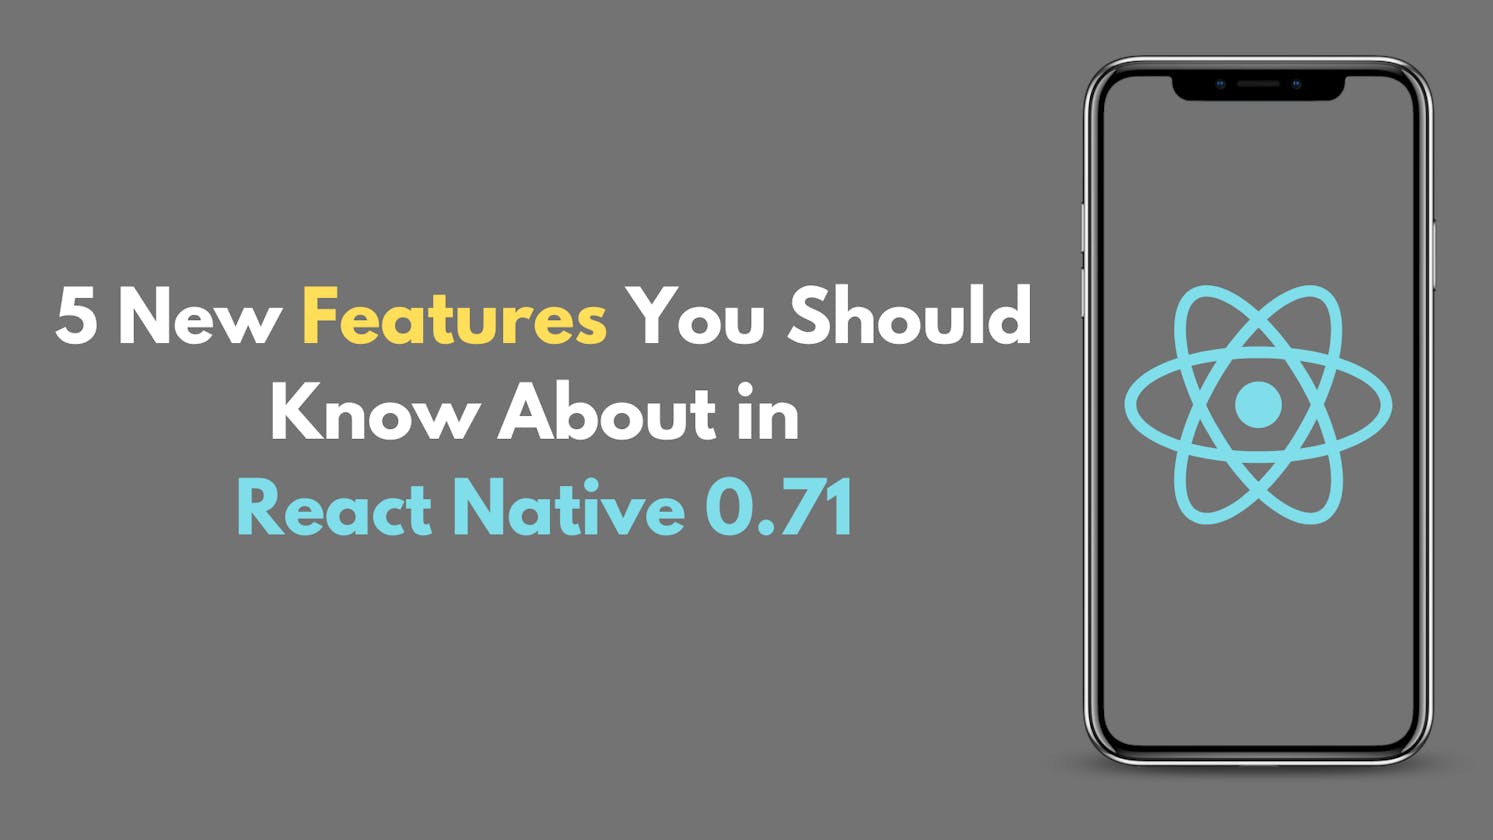 5 New Features You Should Know About in React Native 0.71